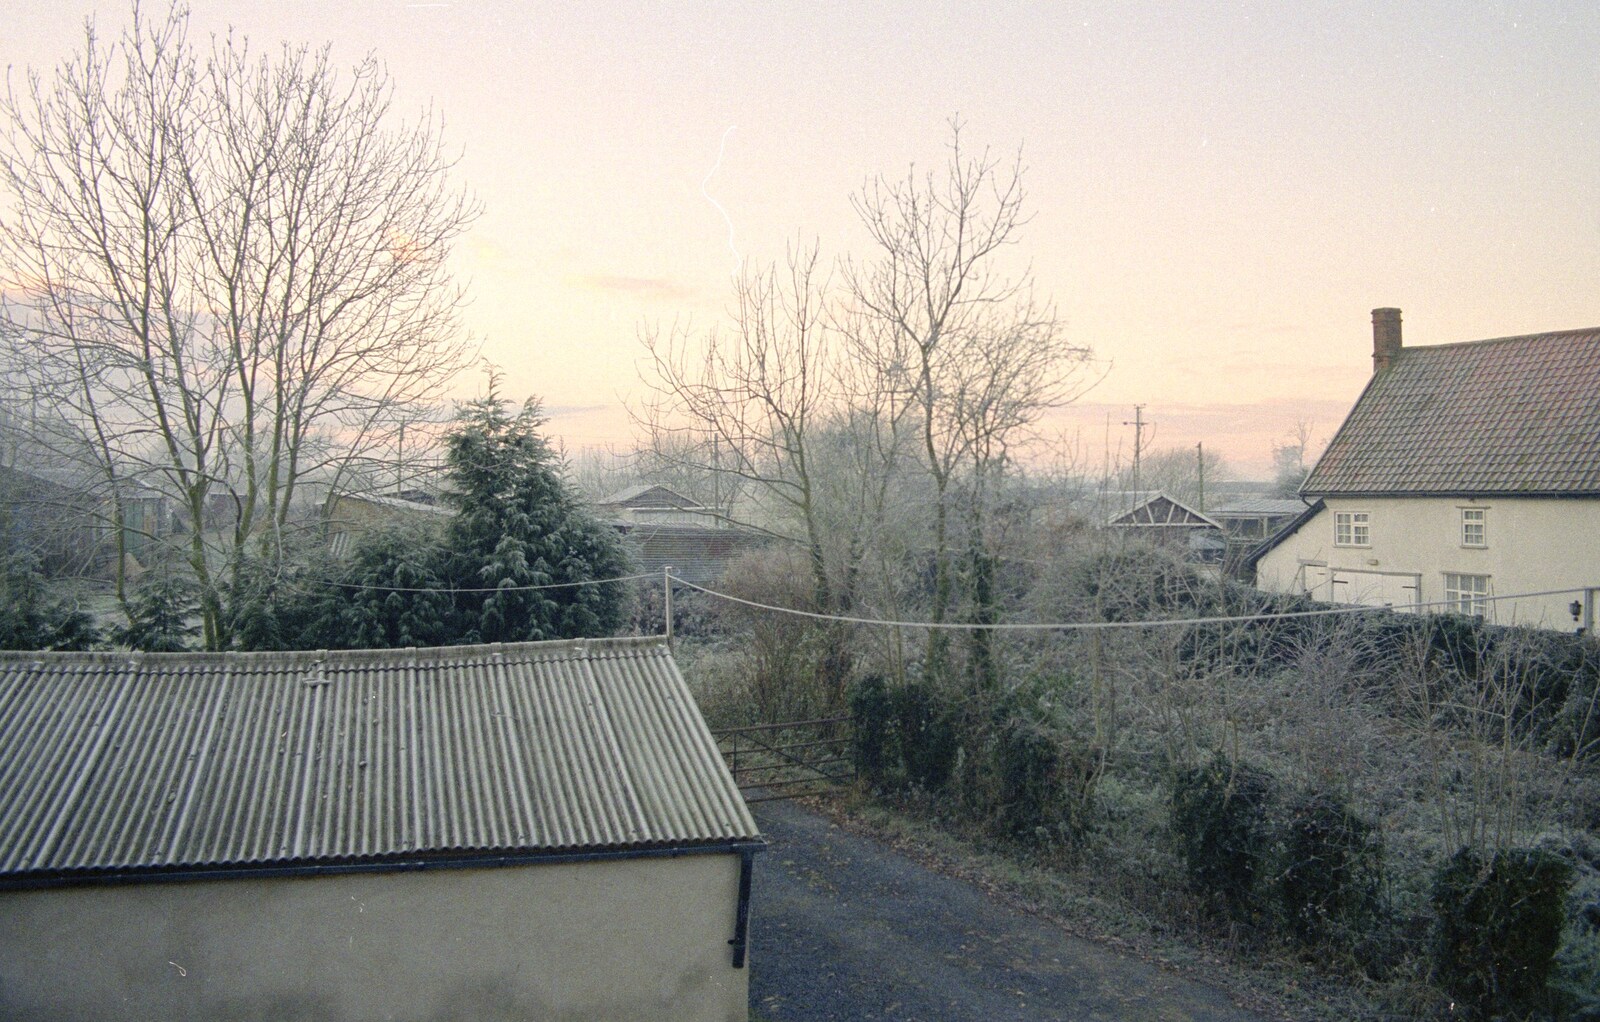 A frosty view from the bedroom window from The Old Man Visits, and a Frosty Stuston, Suffolk - 8th December 1989